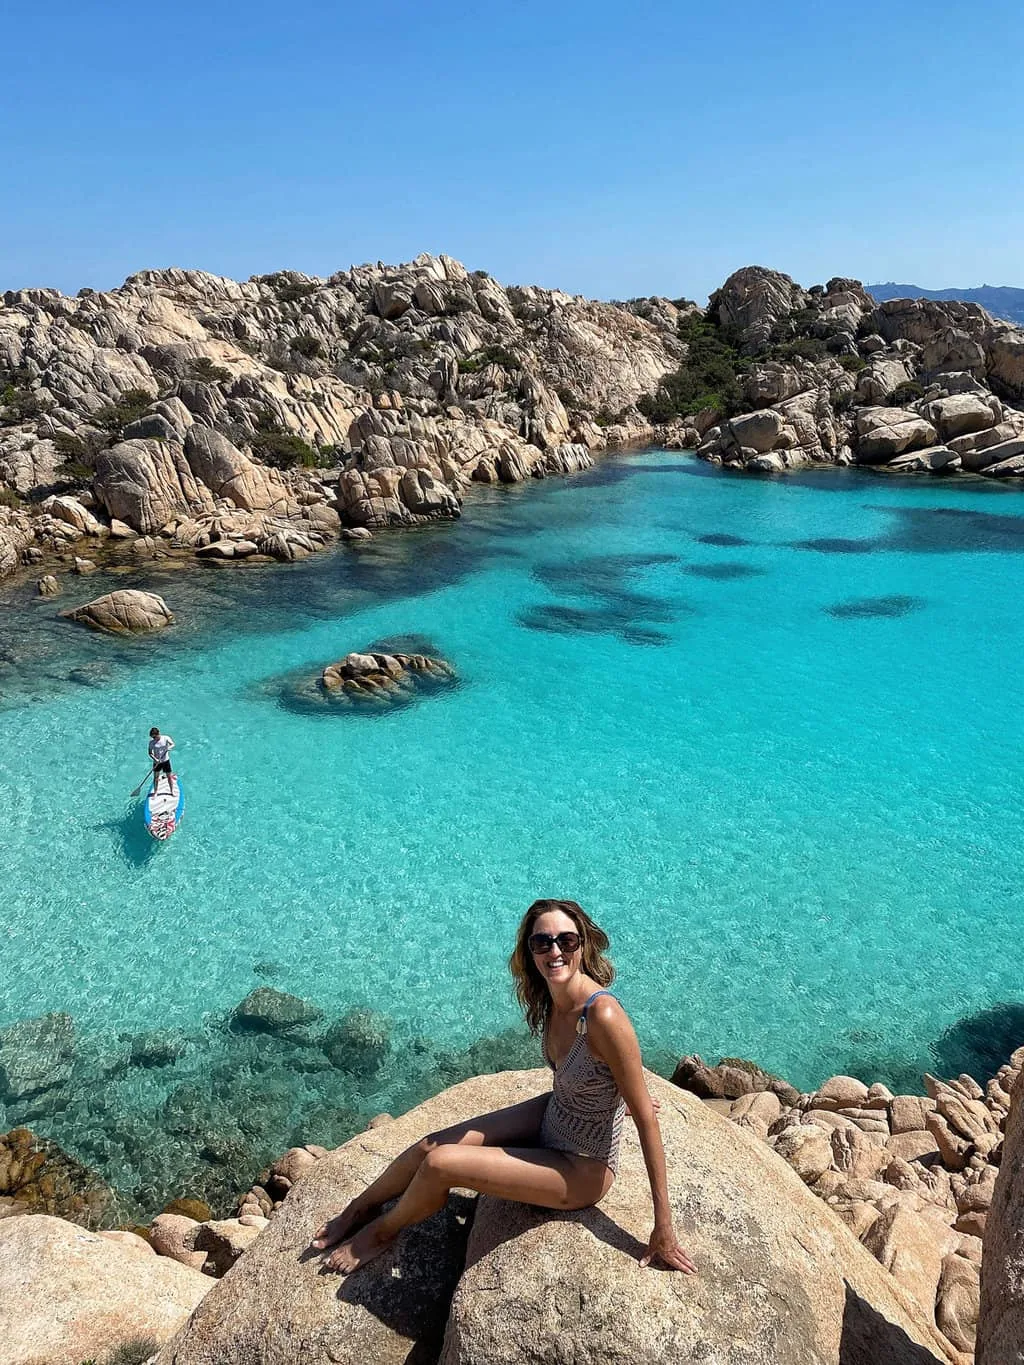 Young girl sitting on a rock in front  of the beach. A man is doing stand up paddle boarding on crytal clear water in the bay behind her in Cala Coticcio on Capera Italy. 